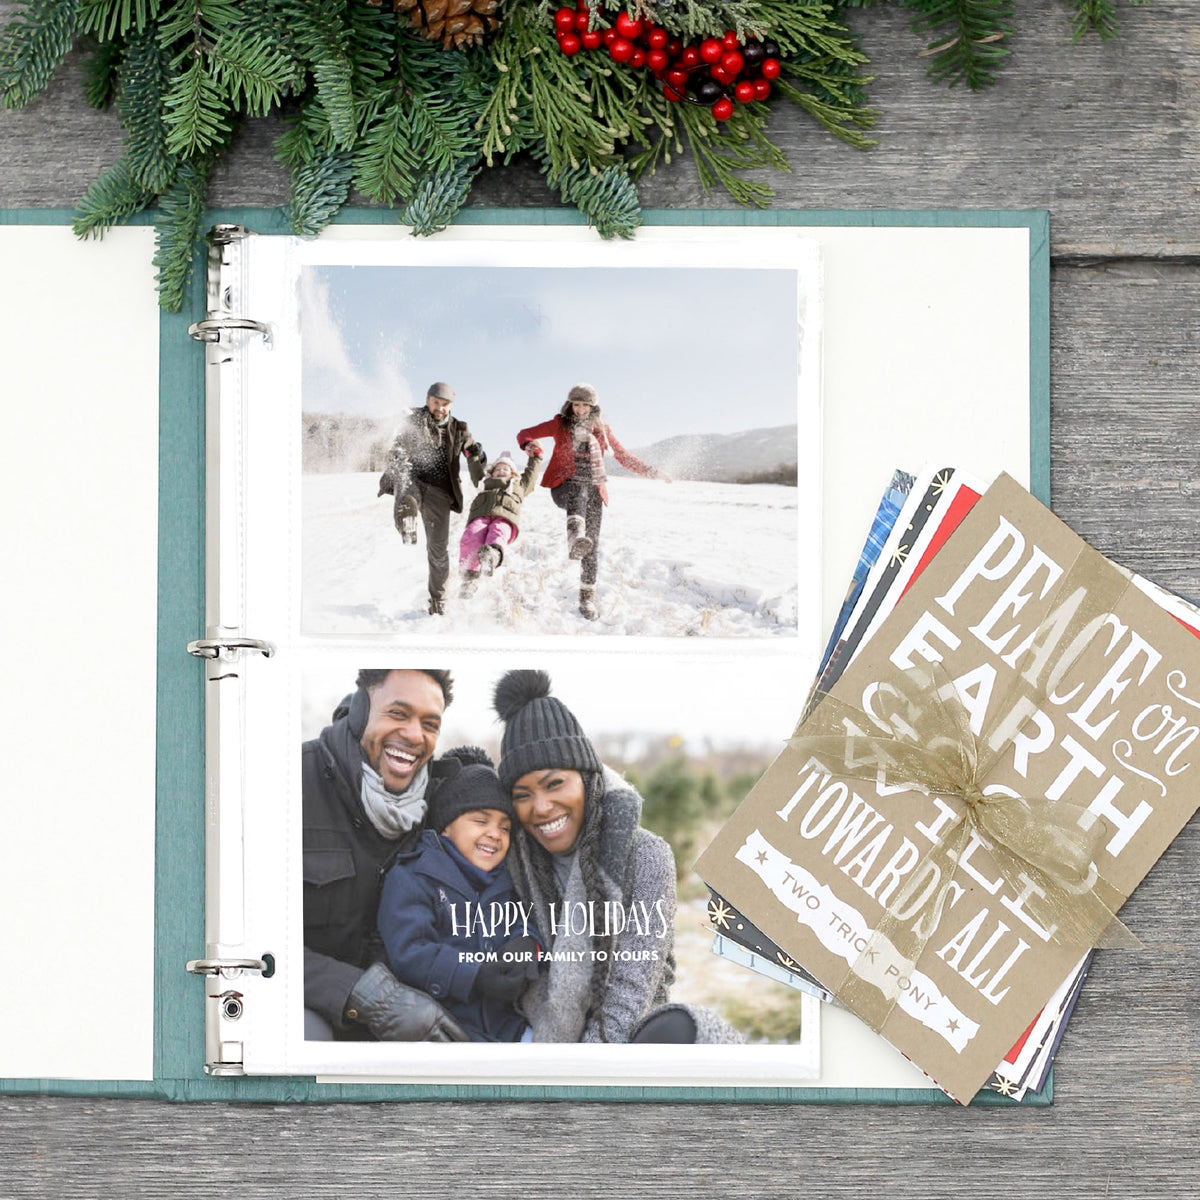 Holiday Card Album | Cover: Lavender Cotton | Embossed with “Holiday Cards” | Available Personalized